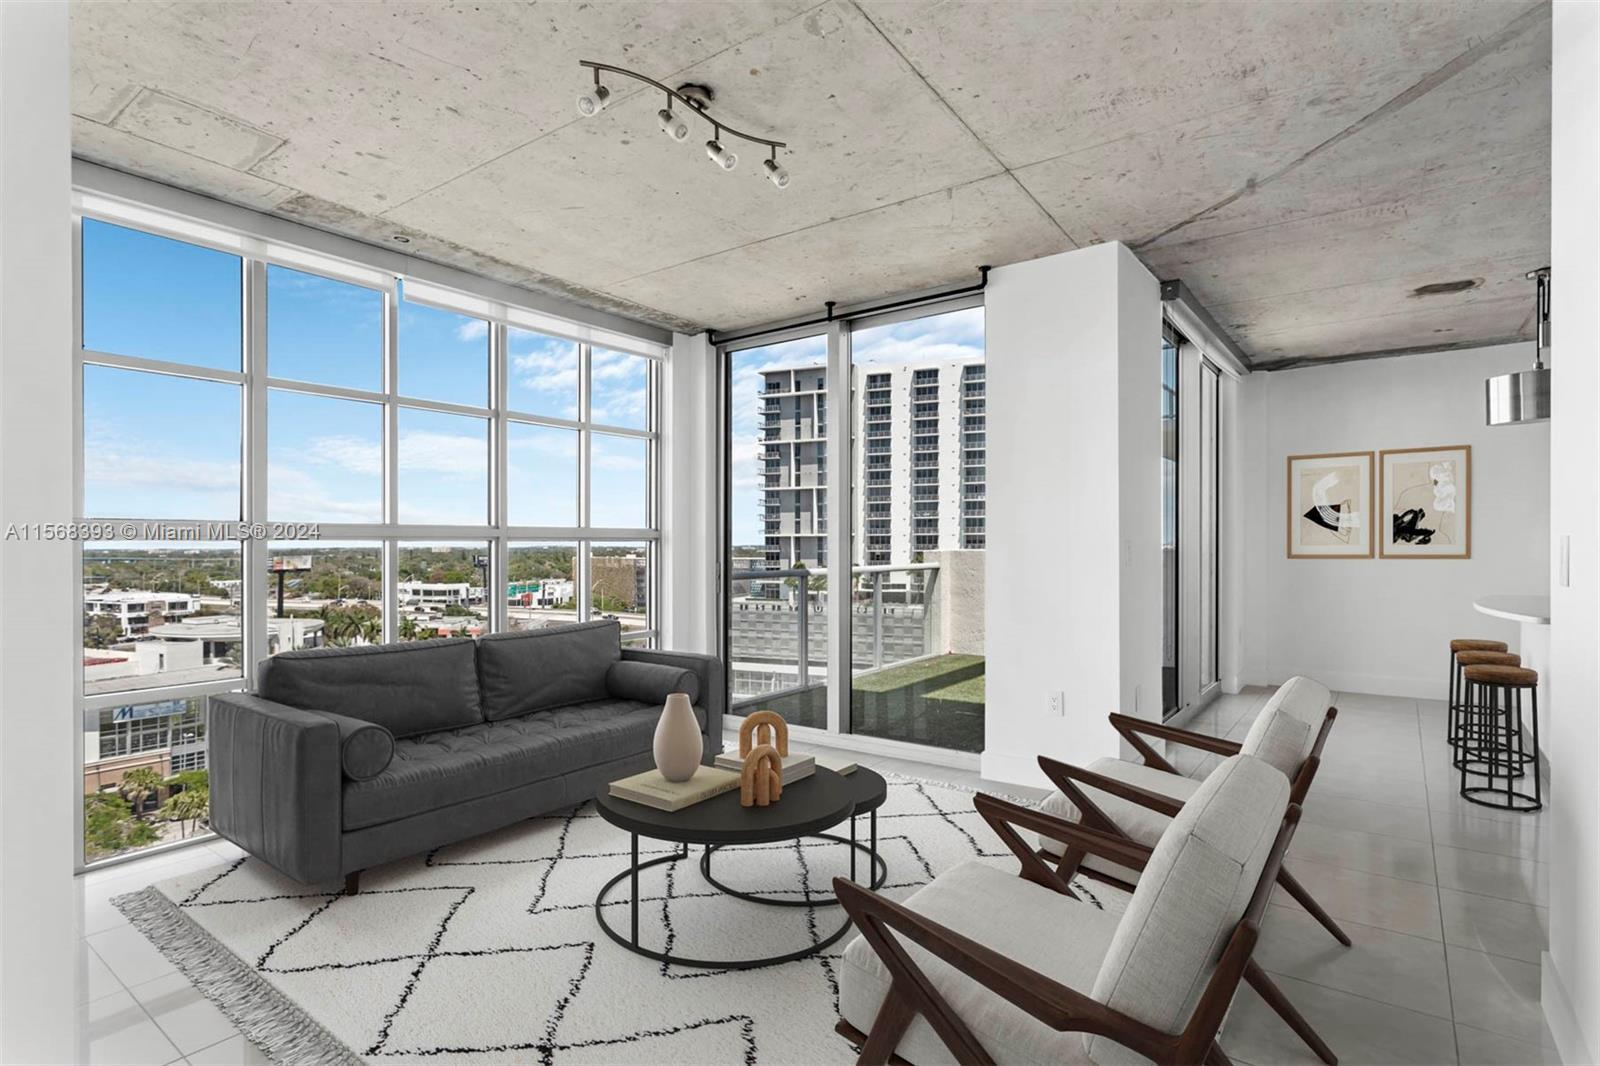 2 Bedroom, 2,5 Baths Penthouse in the heart of Miami Midtown District.

This two-story PH at 2MIDT